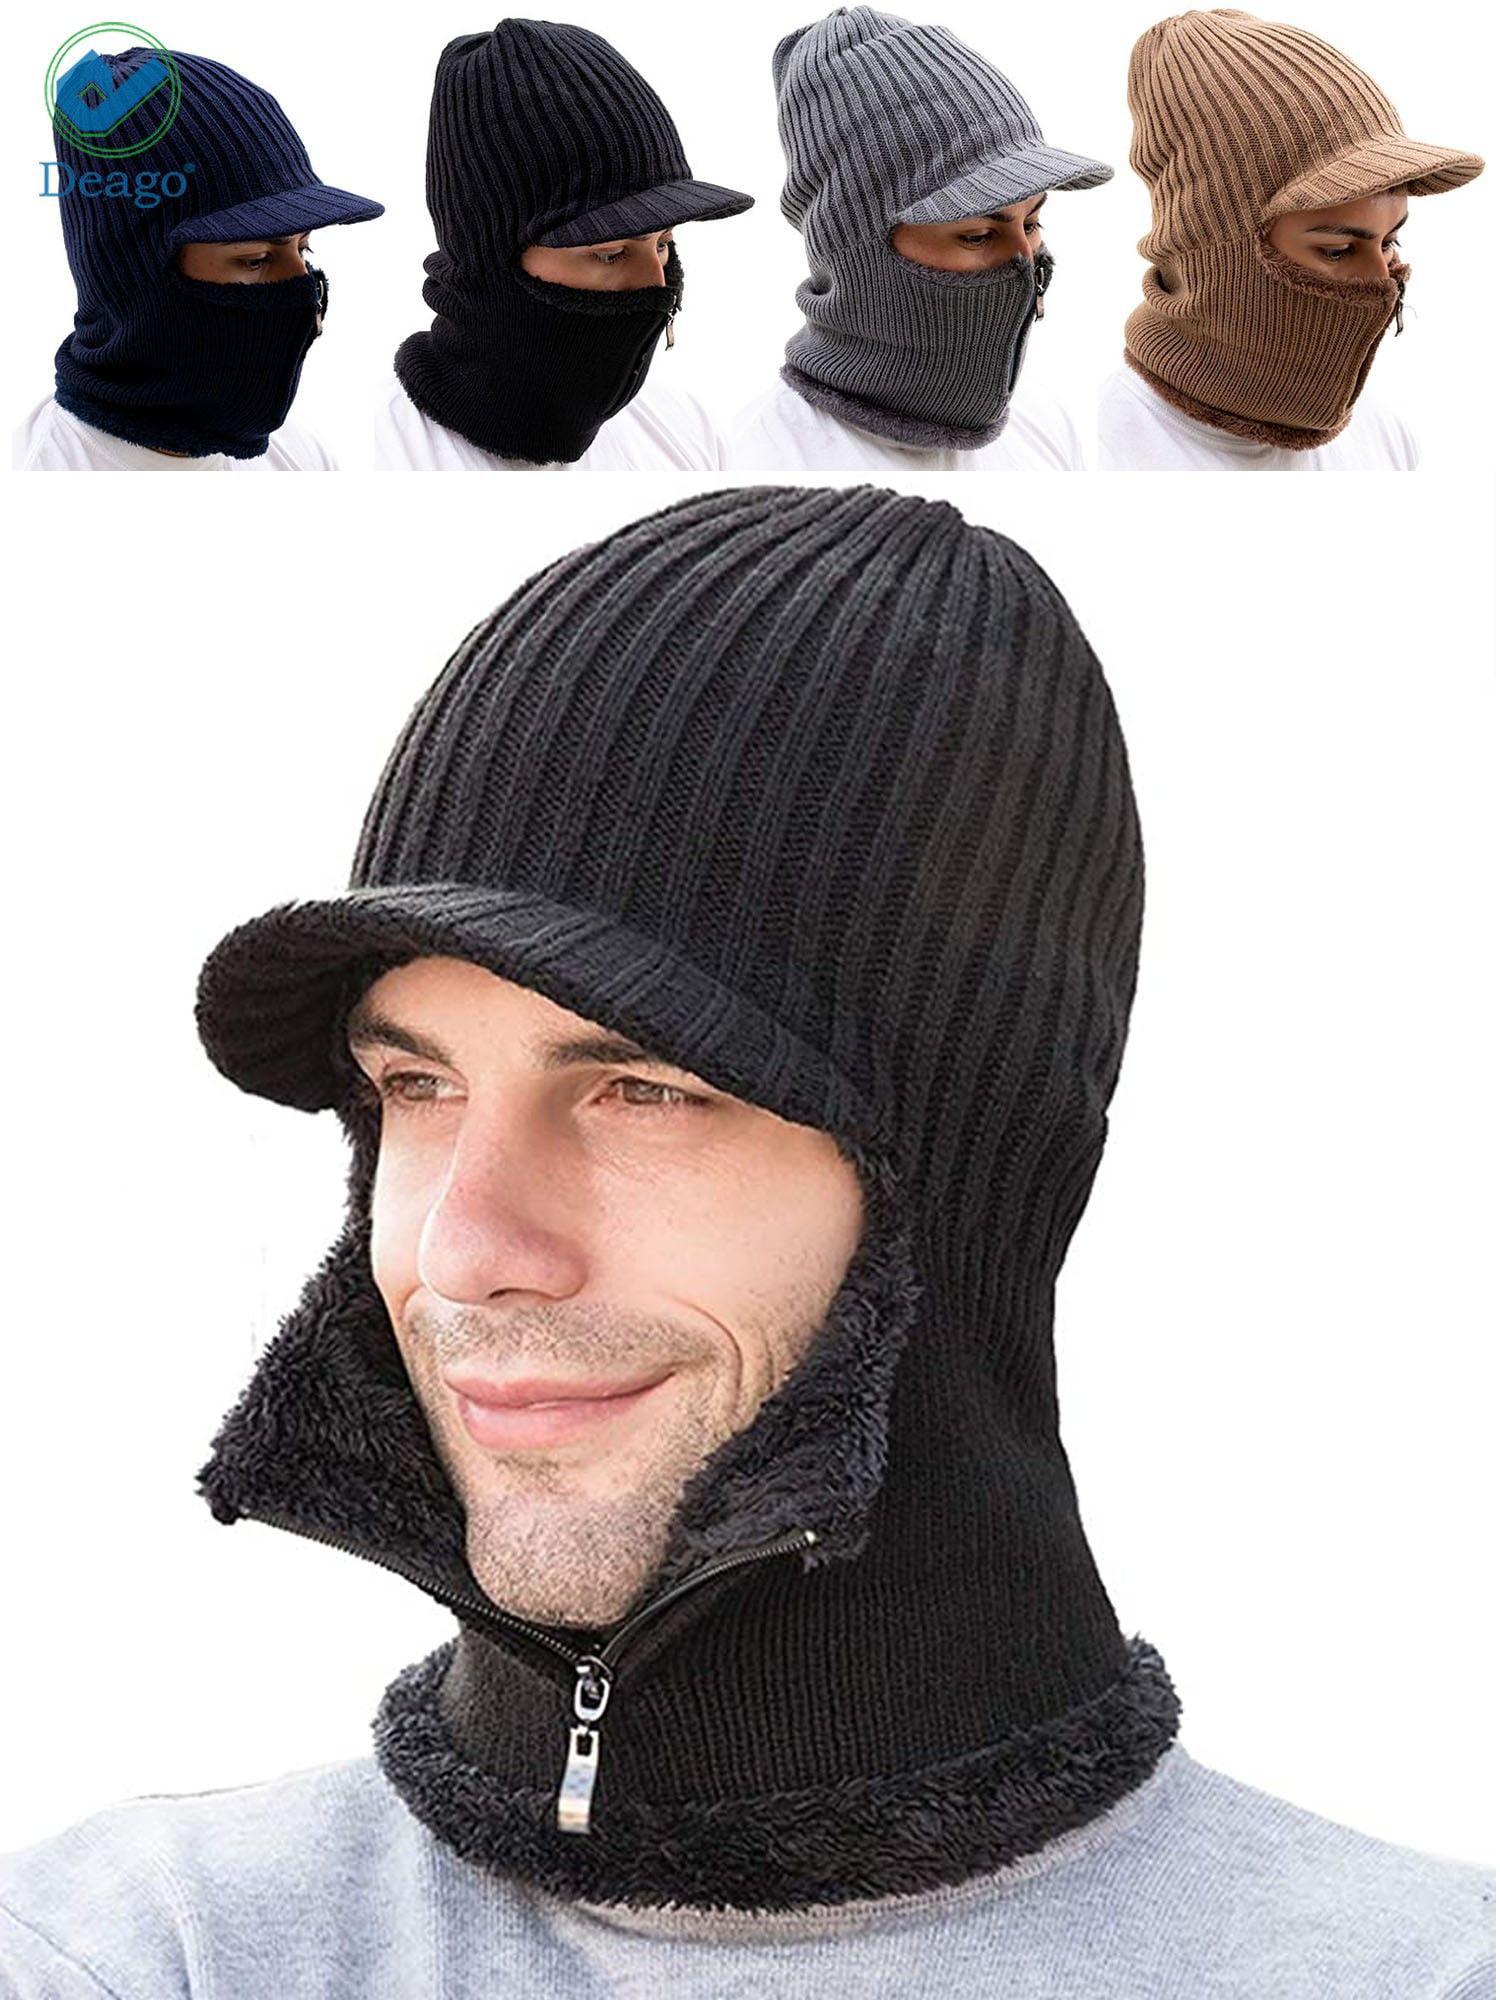 Universal Size Skiing Cycling Beanie Cap Skull Hat with Elastic Neck Warmer for Adults Mens Womens TAGVO Winter Knitted Beanie Hat Scarf Set Thick Soft Fleece Inner Lining Great Warm